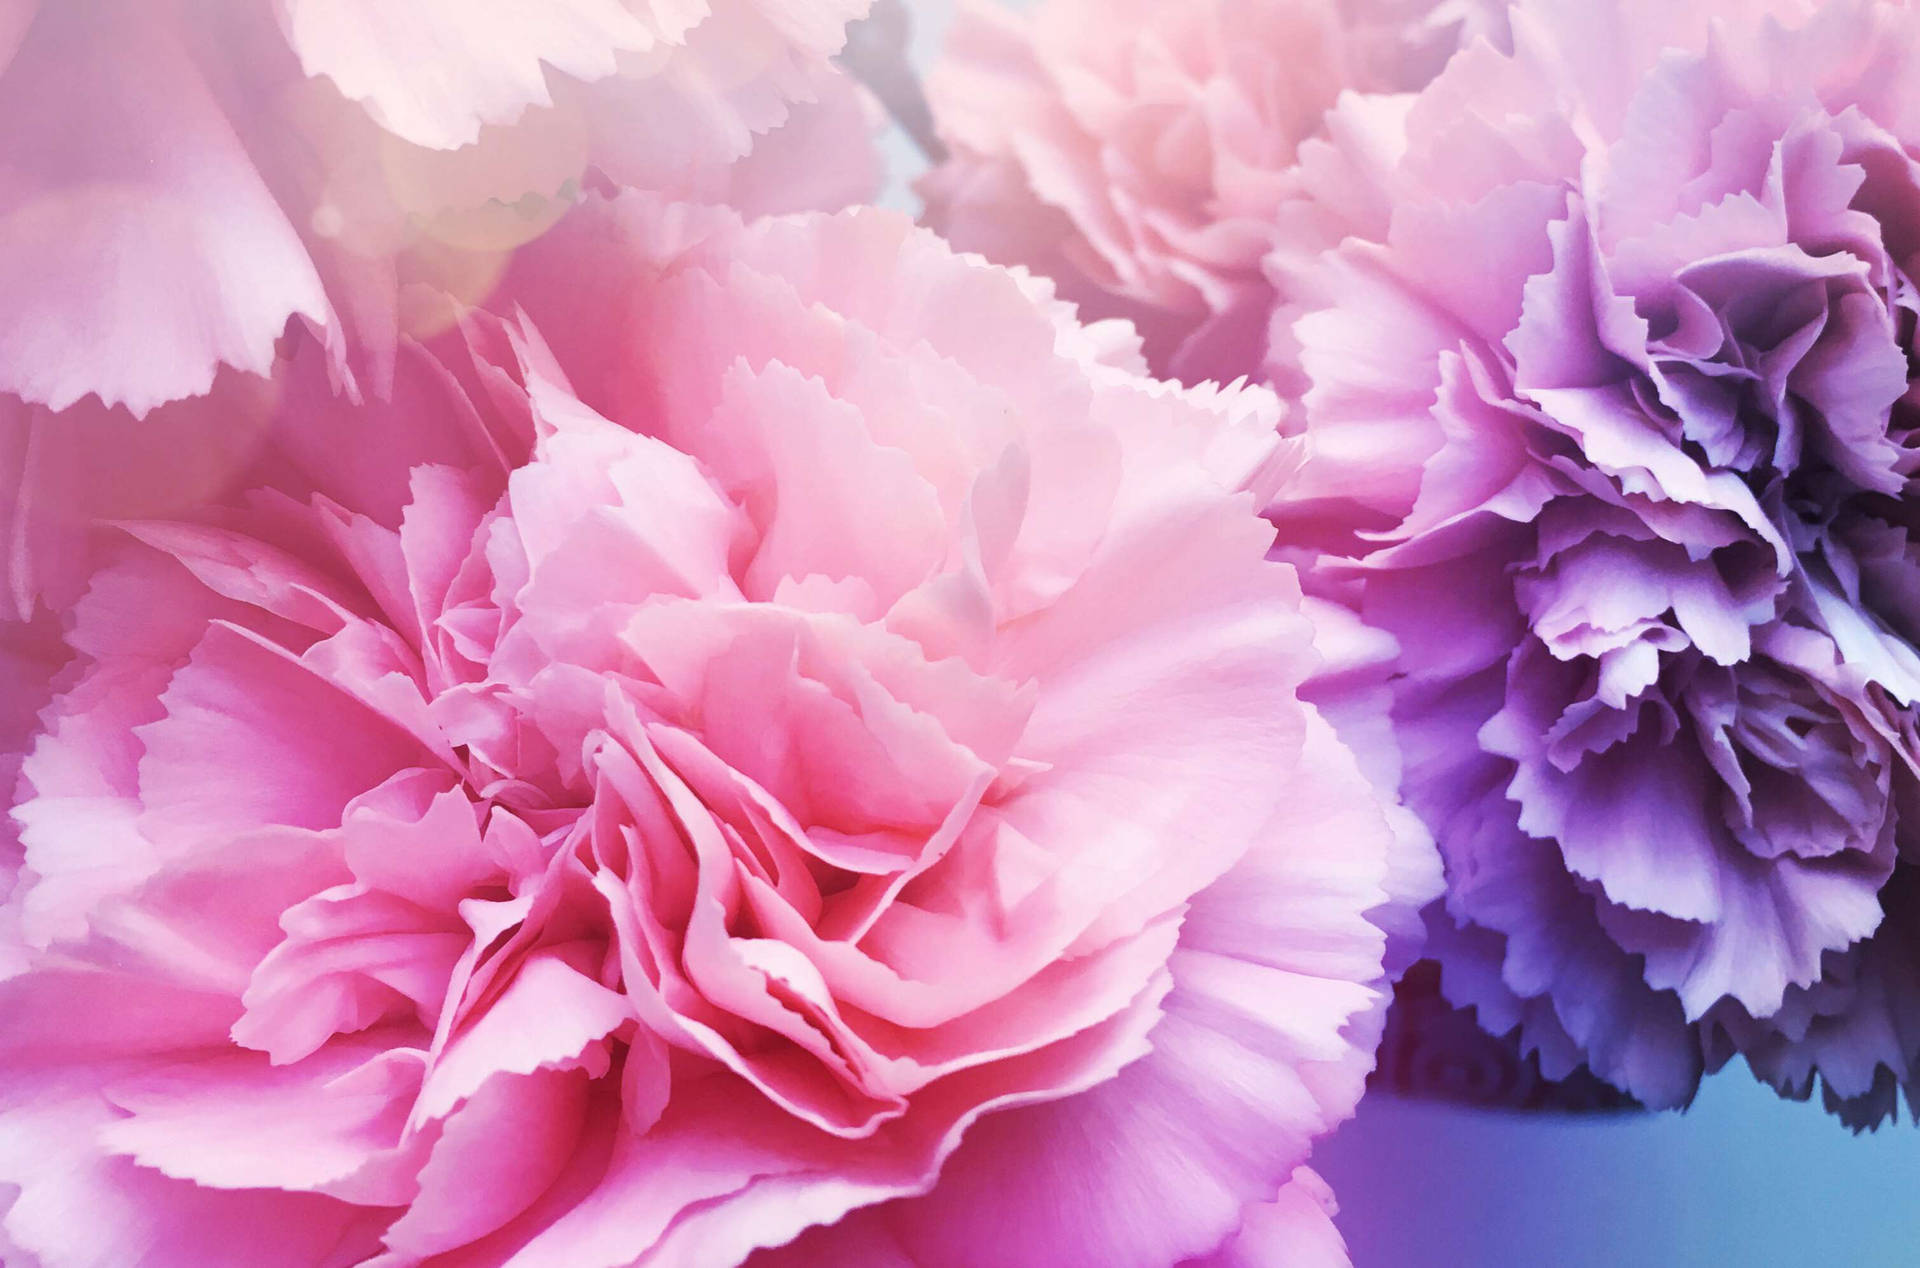 Carnation Photos Download The BEST Free Carnation Stock Photos  HD Images